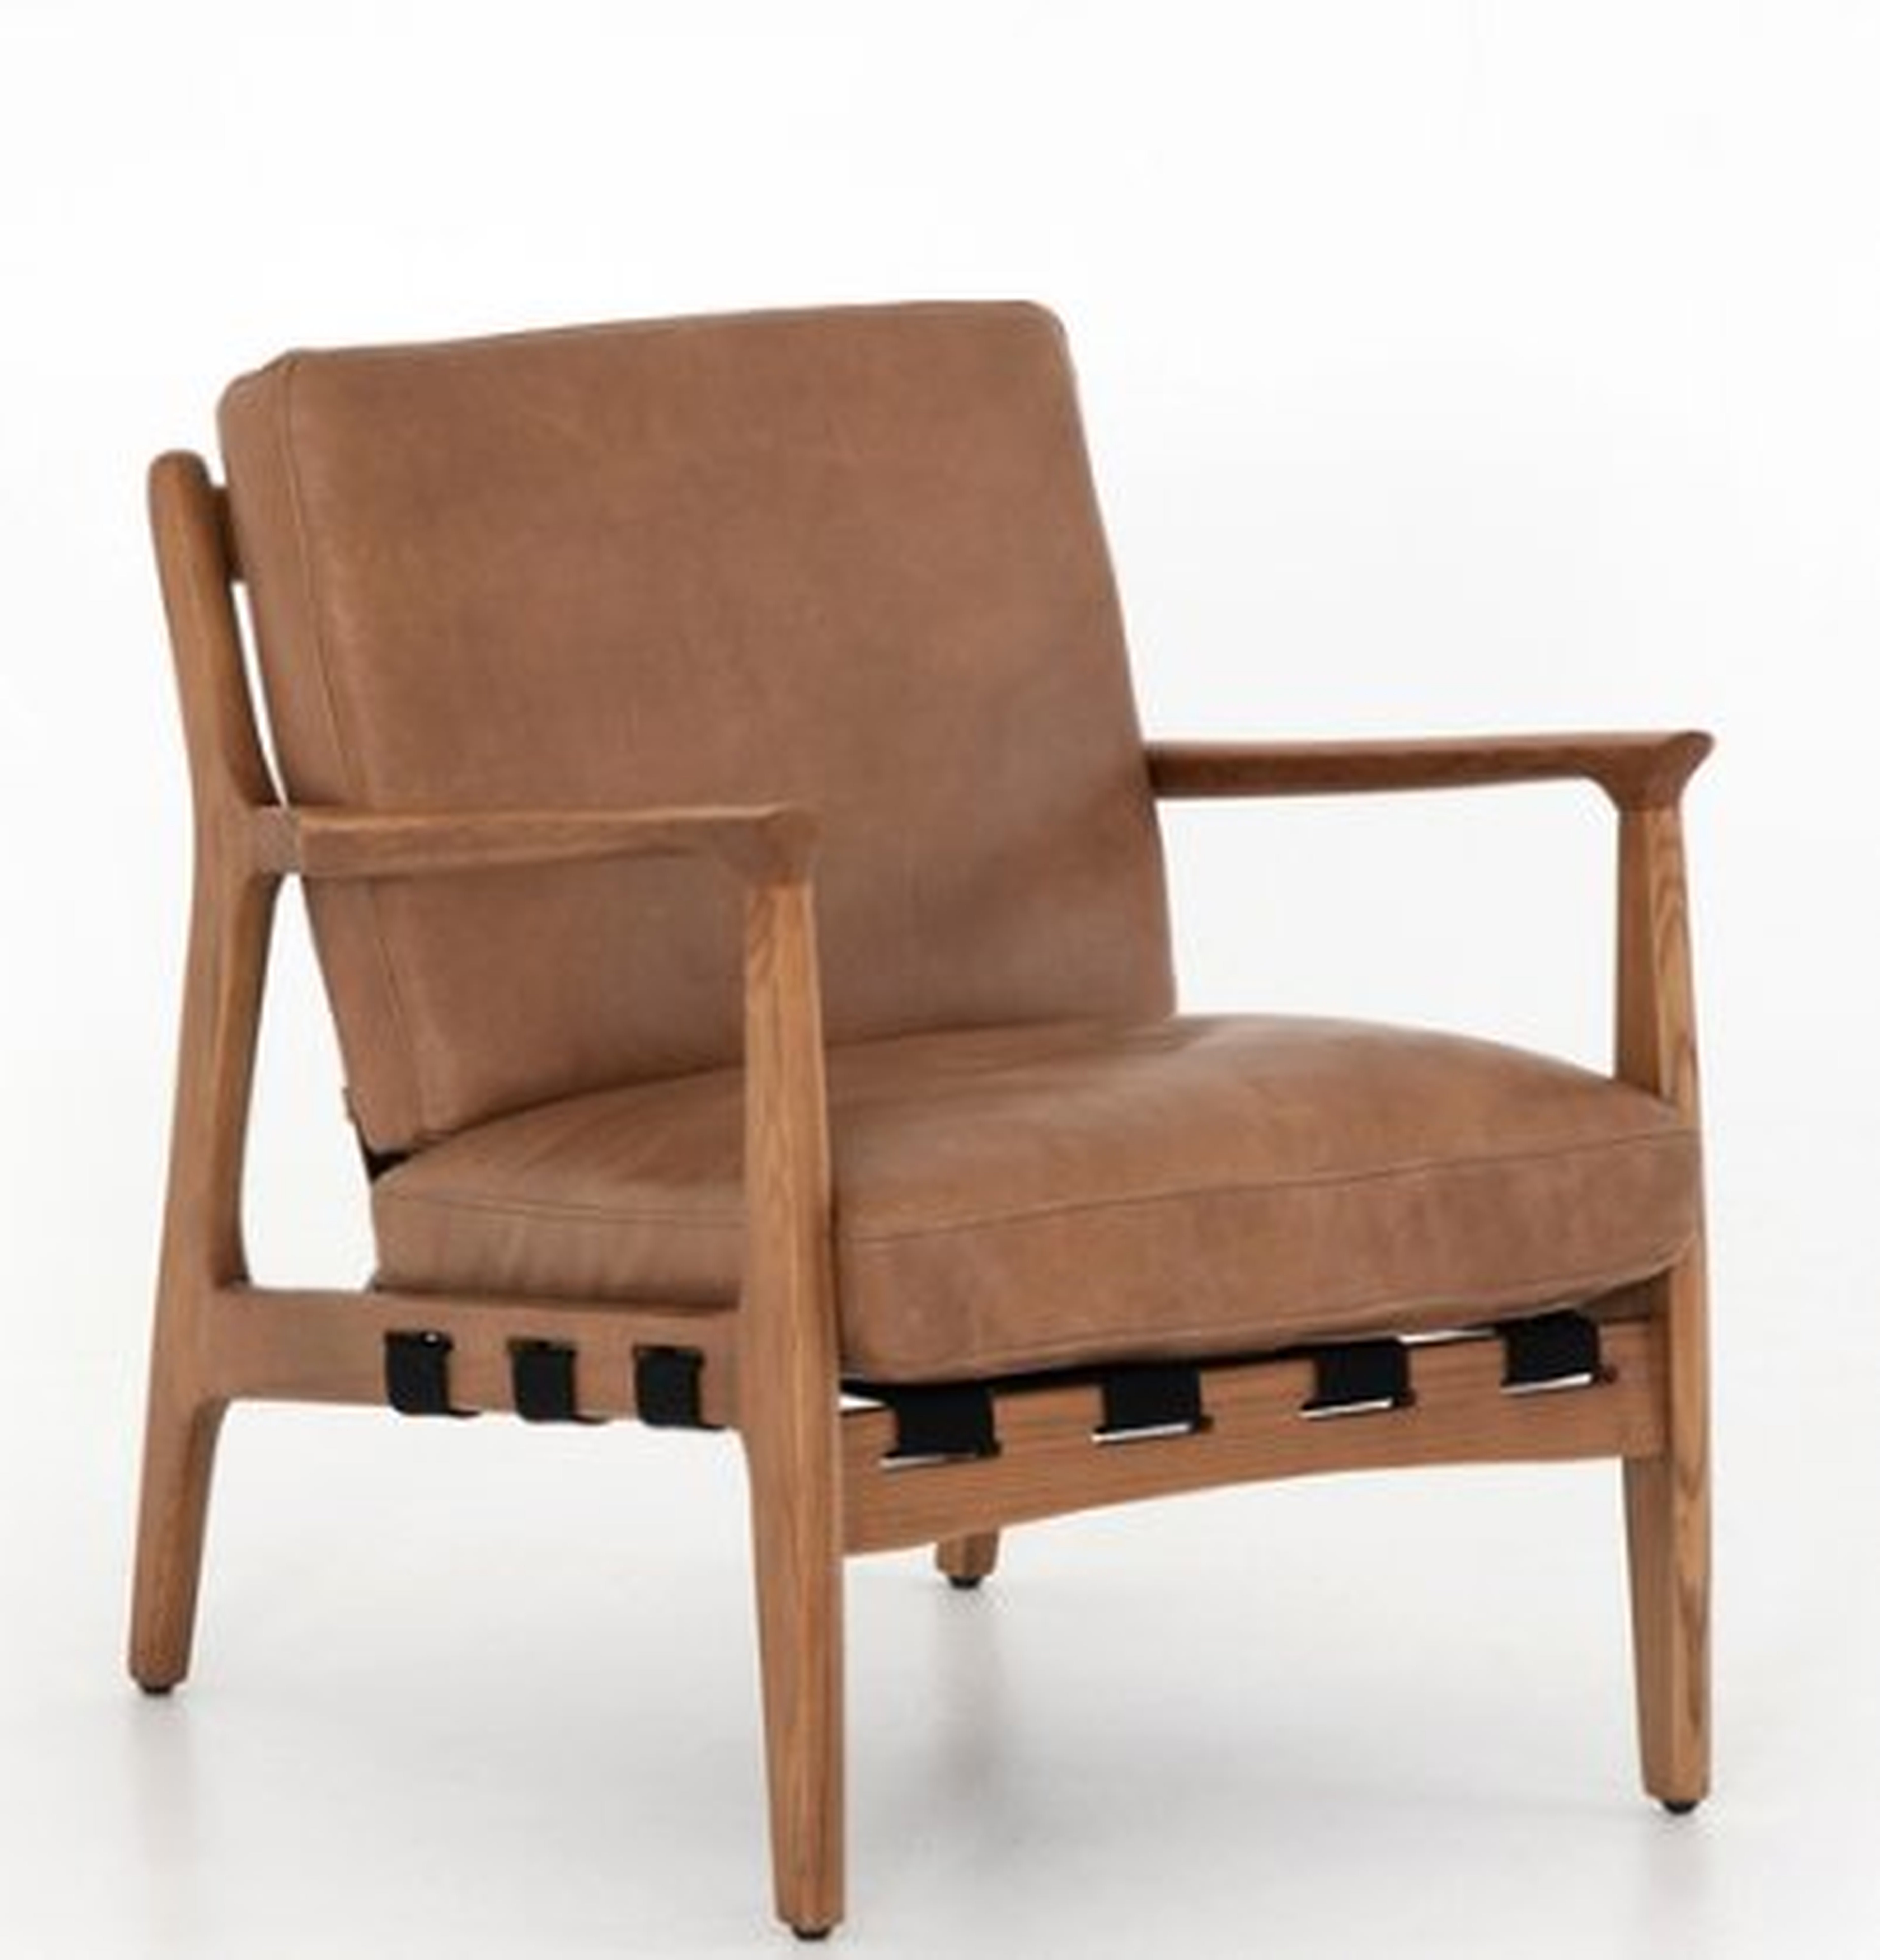 KENNETH LEATHER CHAIR, COPPER - Lulu and Georgia